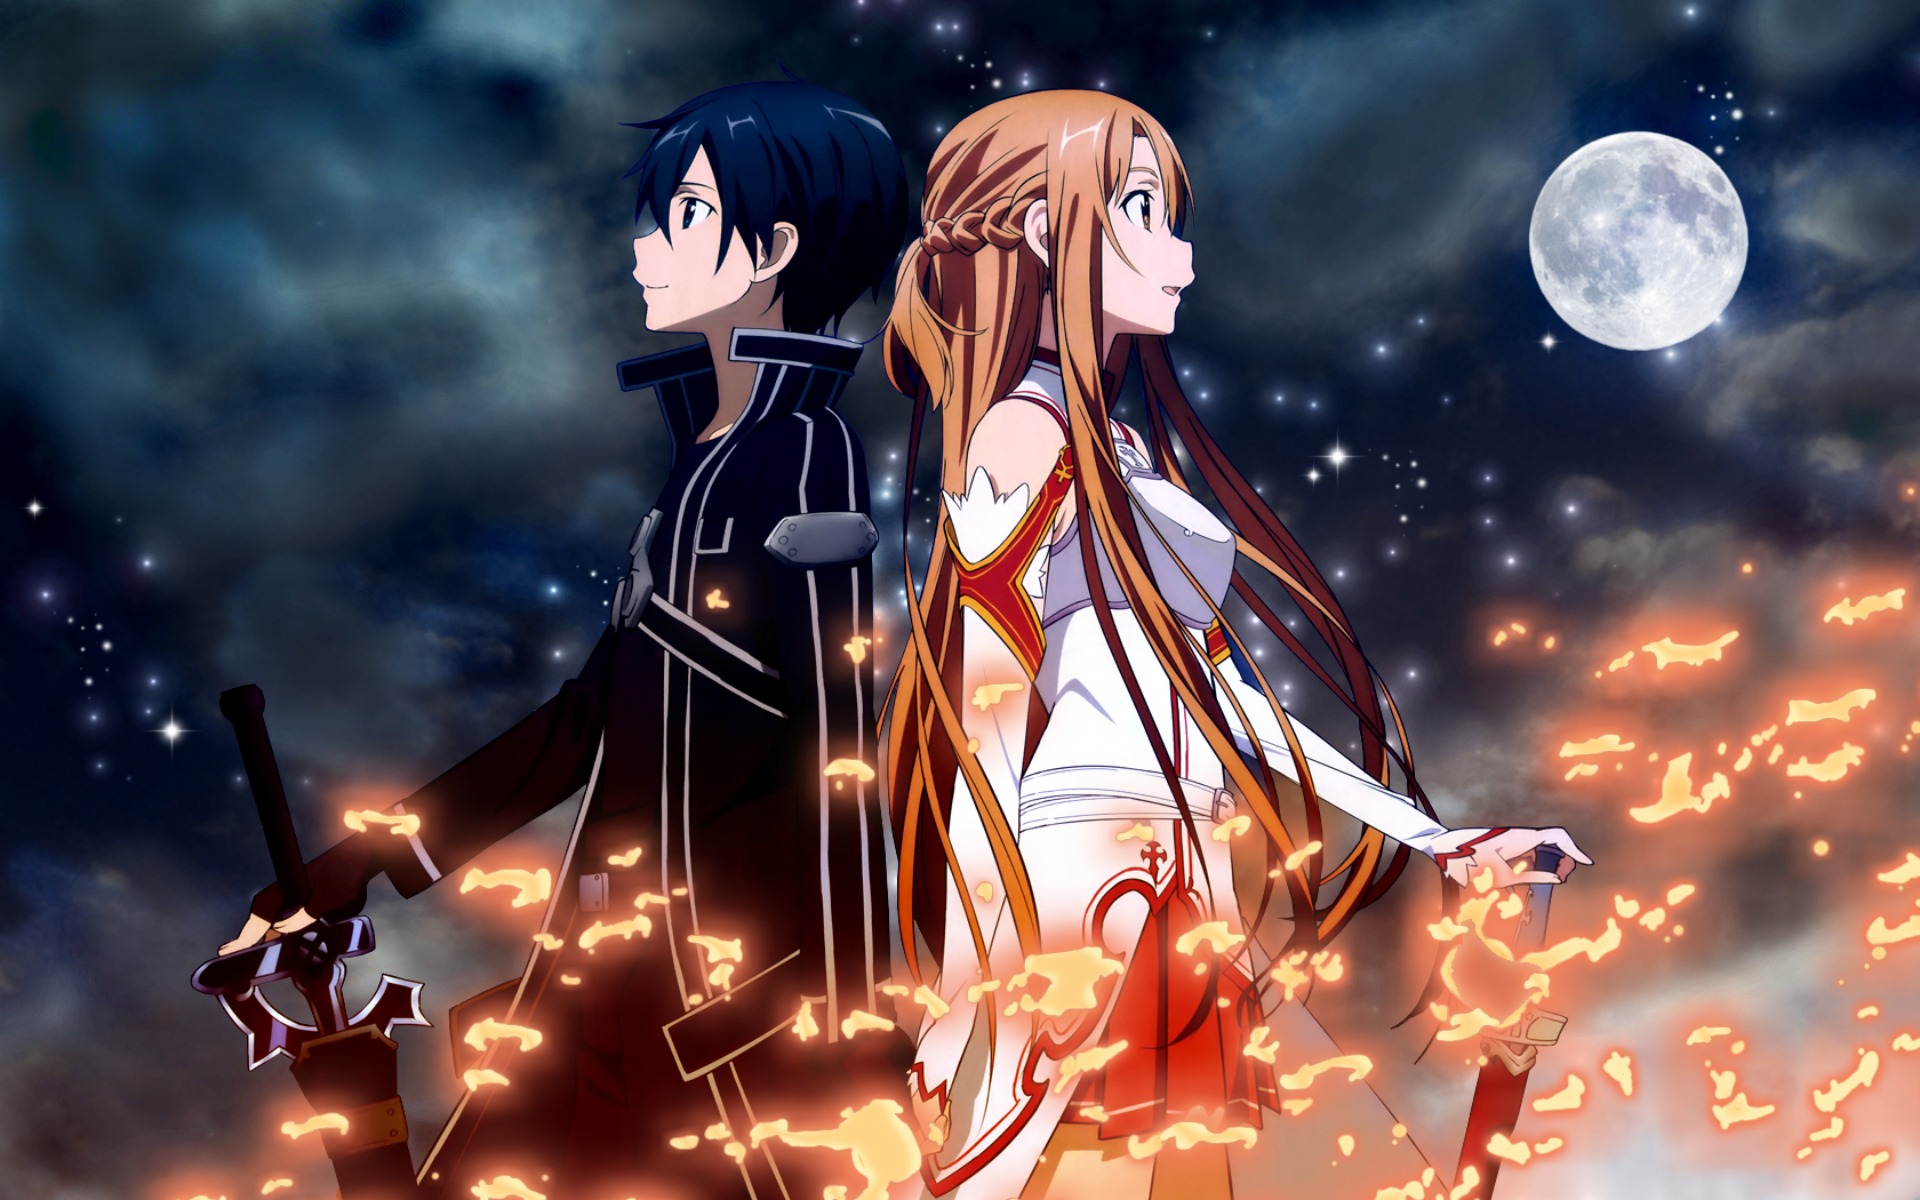  Art Online images SAO HD wallpaper and background photos 34784898 1920x1200